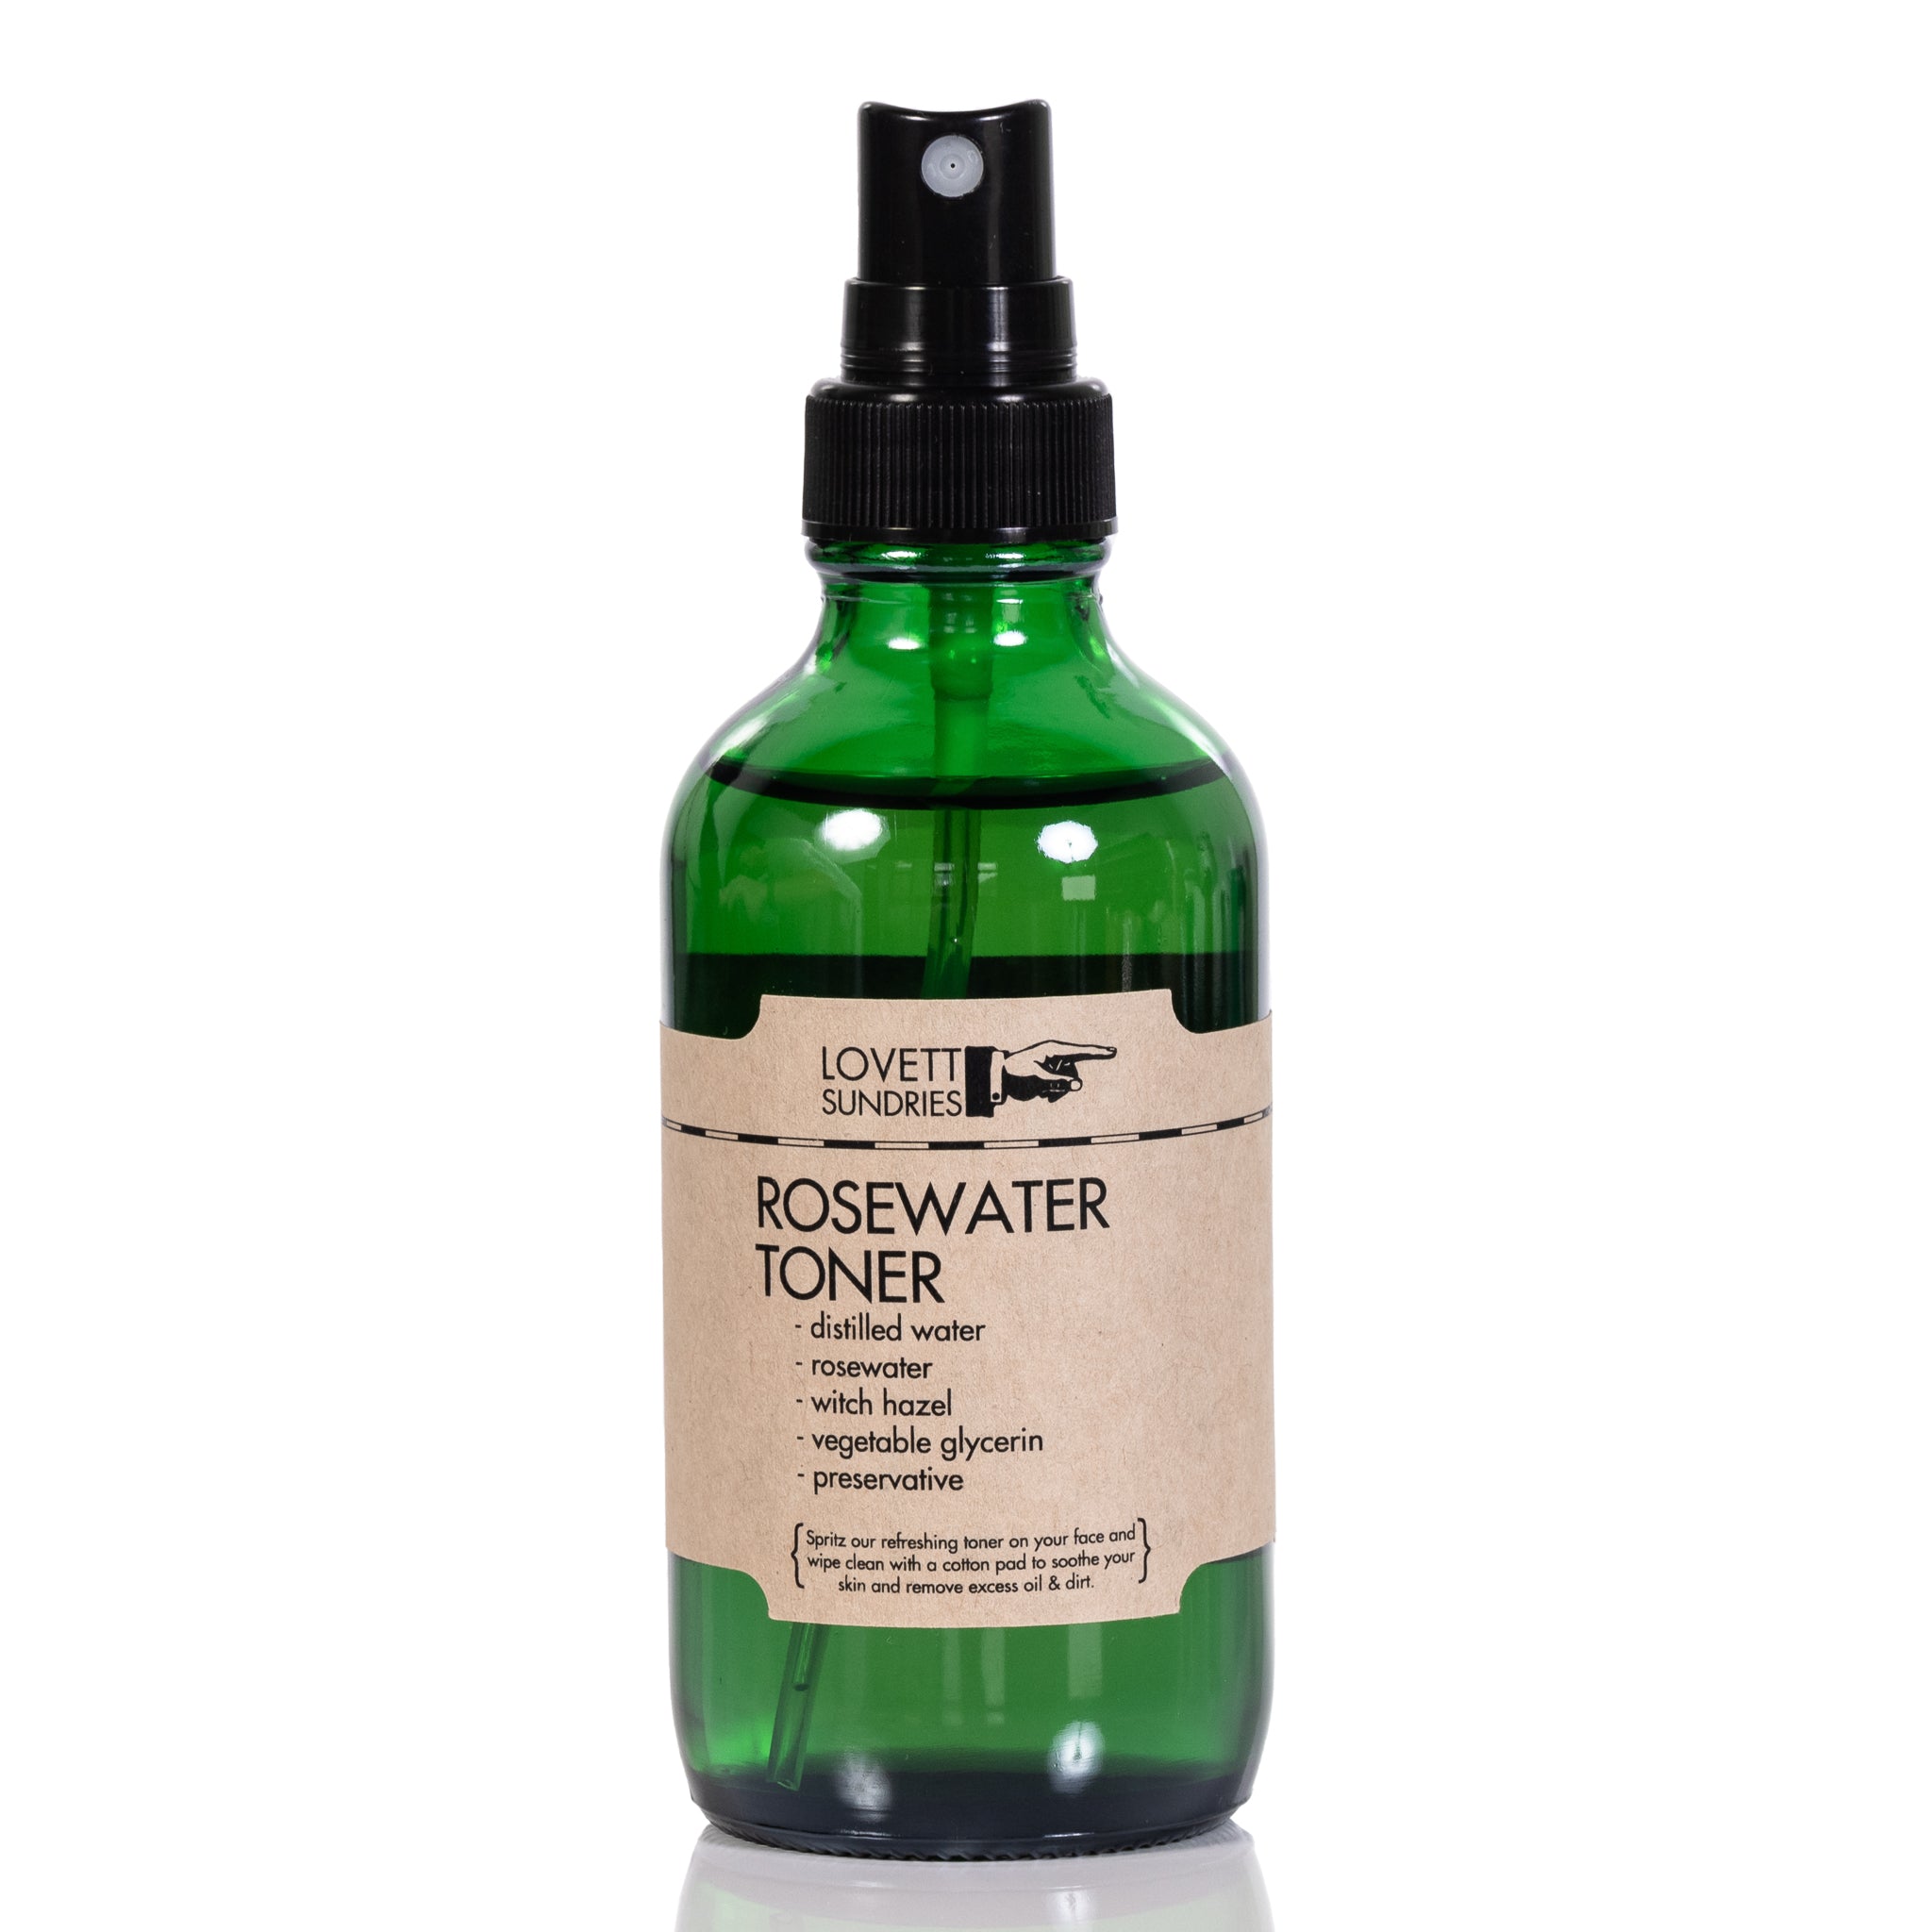 Glass bottle with mist sprayer and kraft paper label, contains rose-scented facial cleanser.